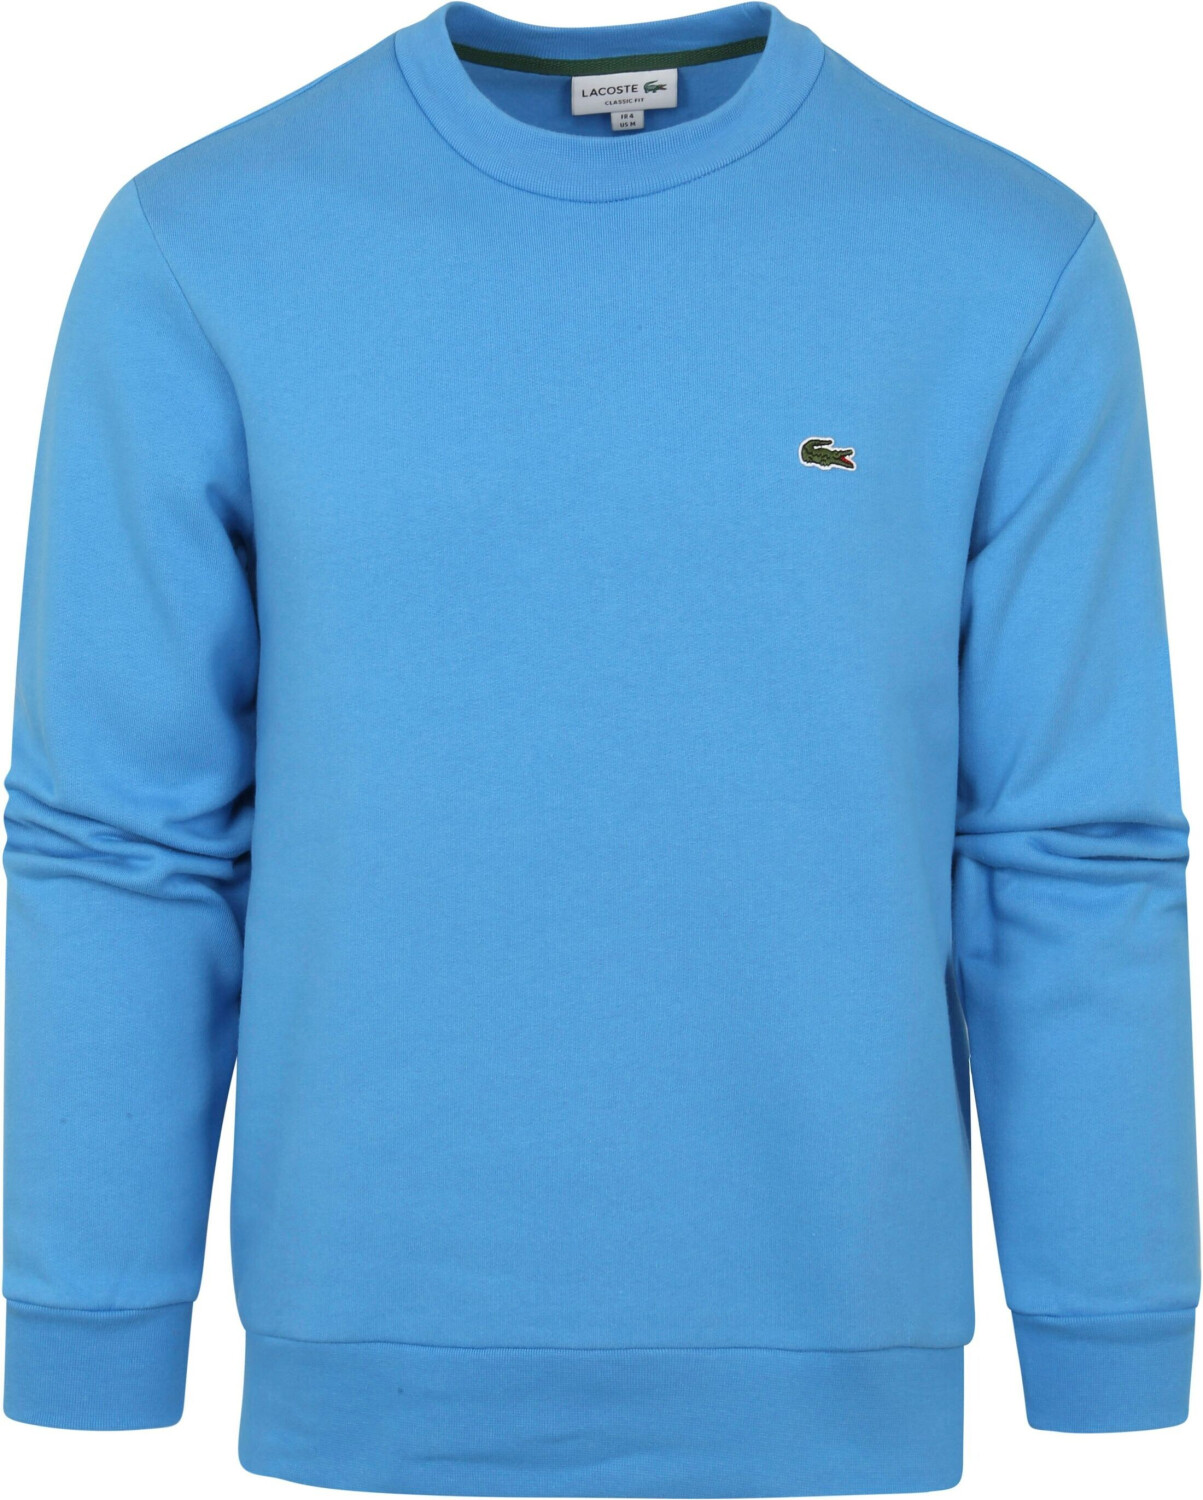 Buy Lacoste Sweatshirts (SH9608) argentine Best from on Deals – (Today) £68.00 blue